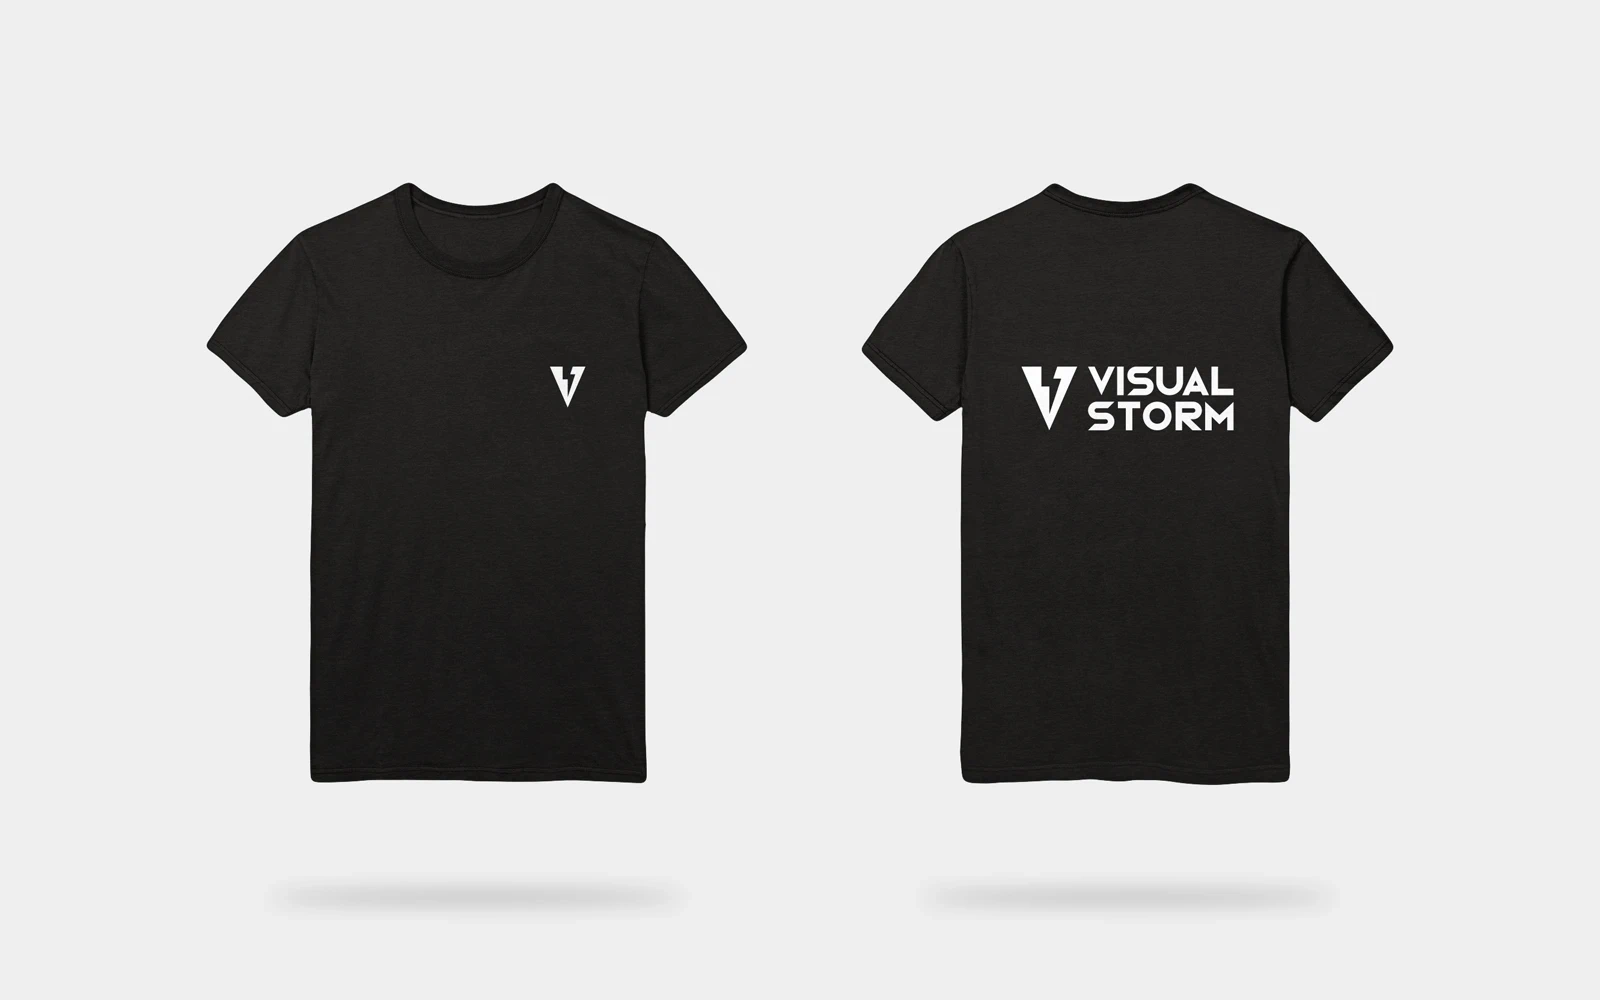 The front and back of the Visual Storm branded t-shirts are displayed on a plain, grey background. The t-shirt is black with the front showing the small version of the Visual Storm logo in the top right and the back featuring the large version of the logo positioned in the top centre